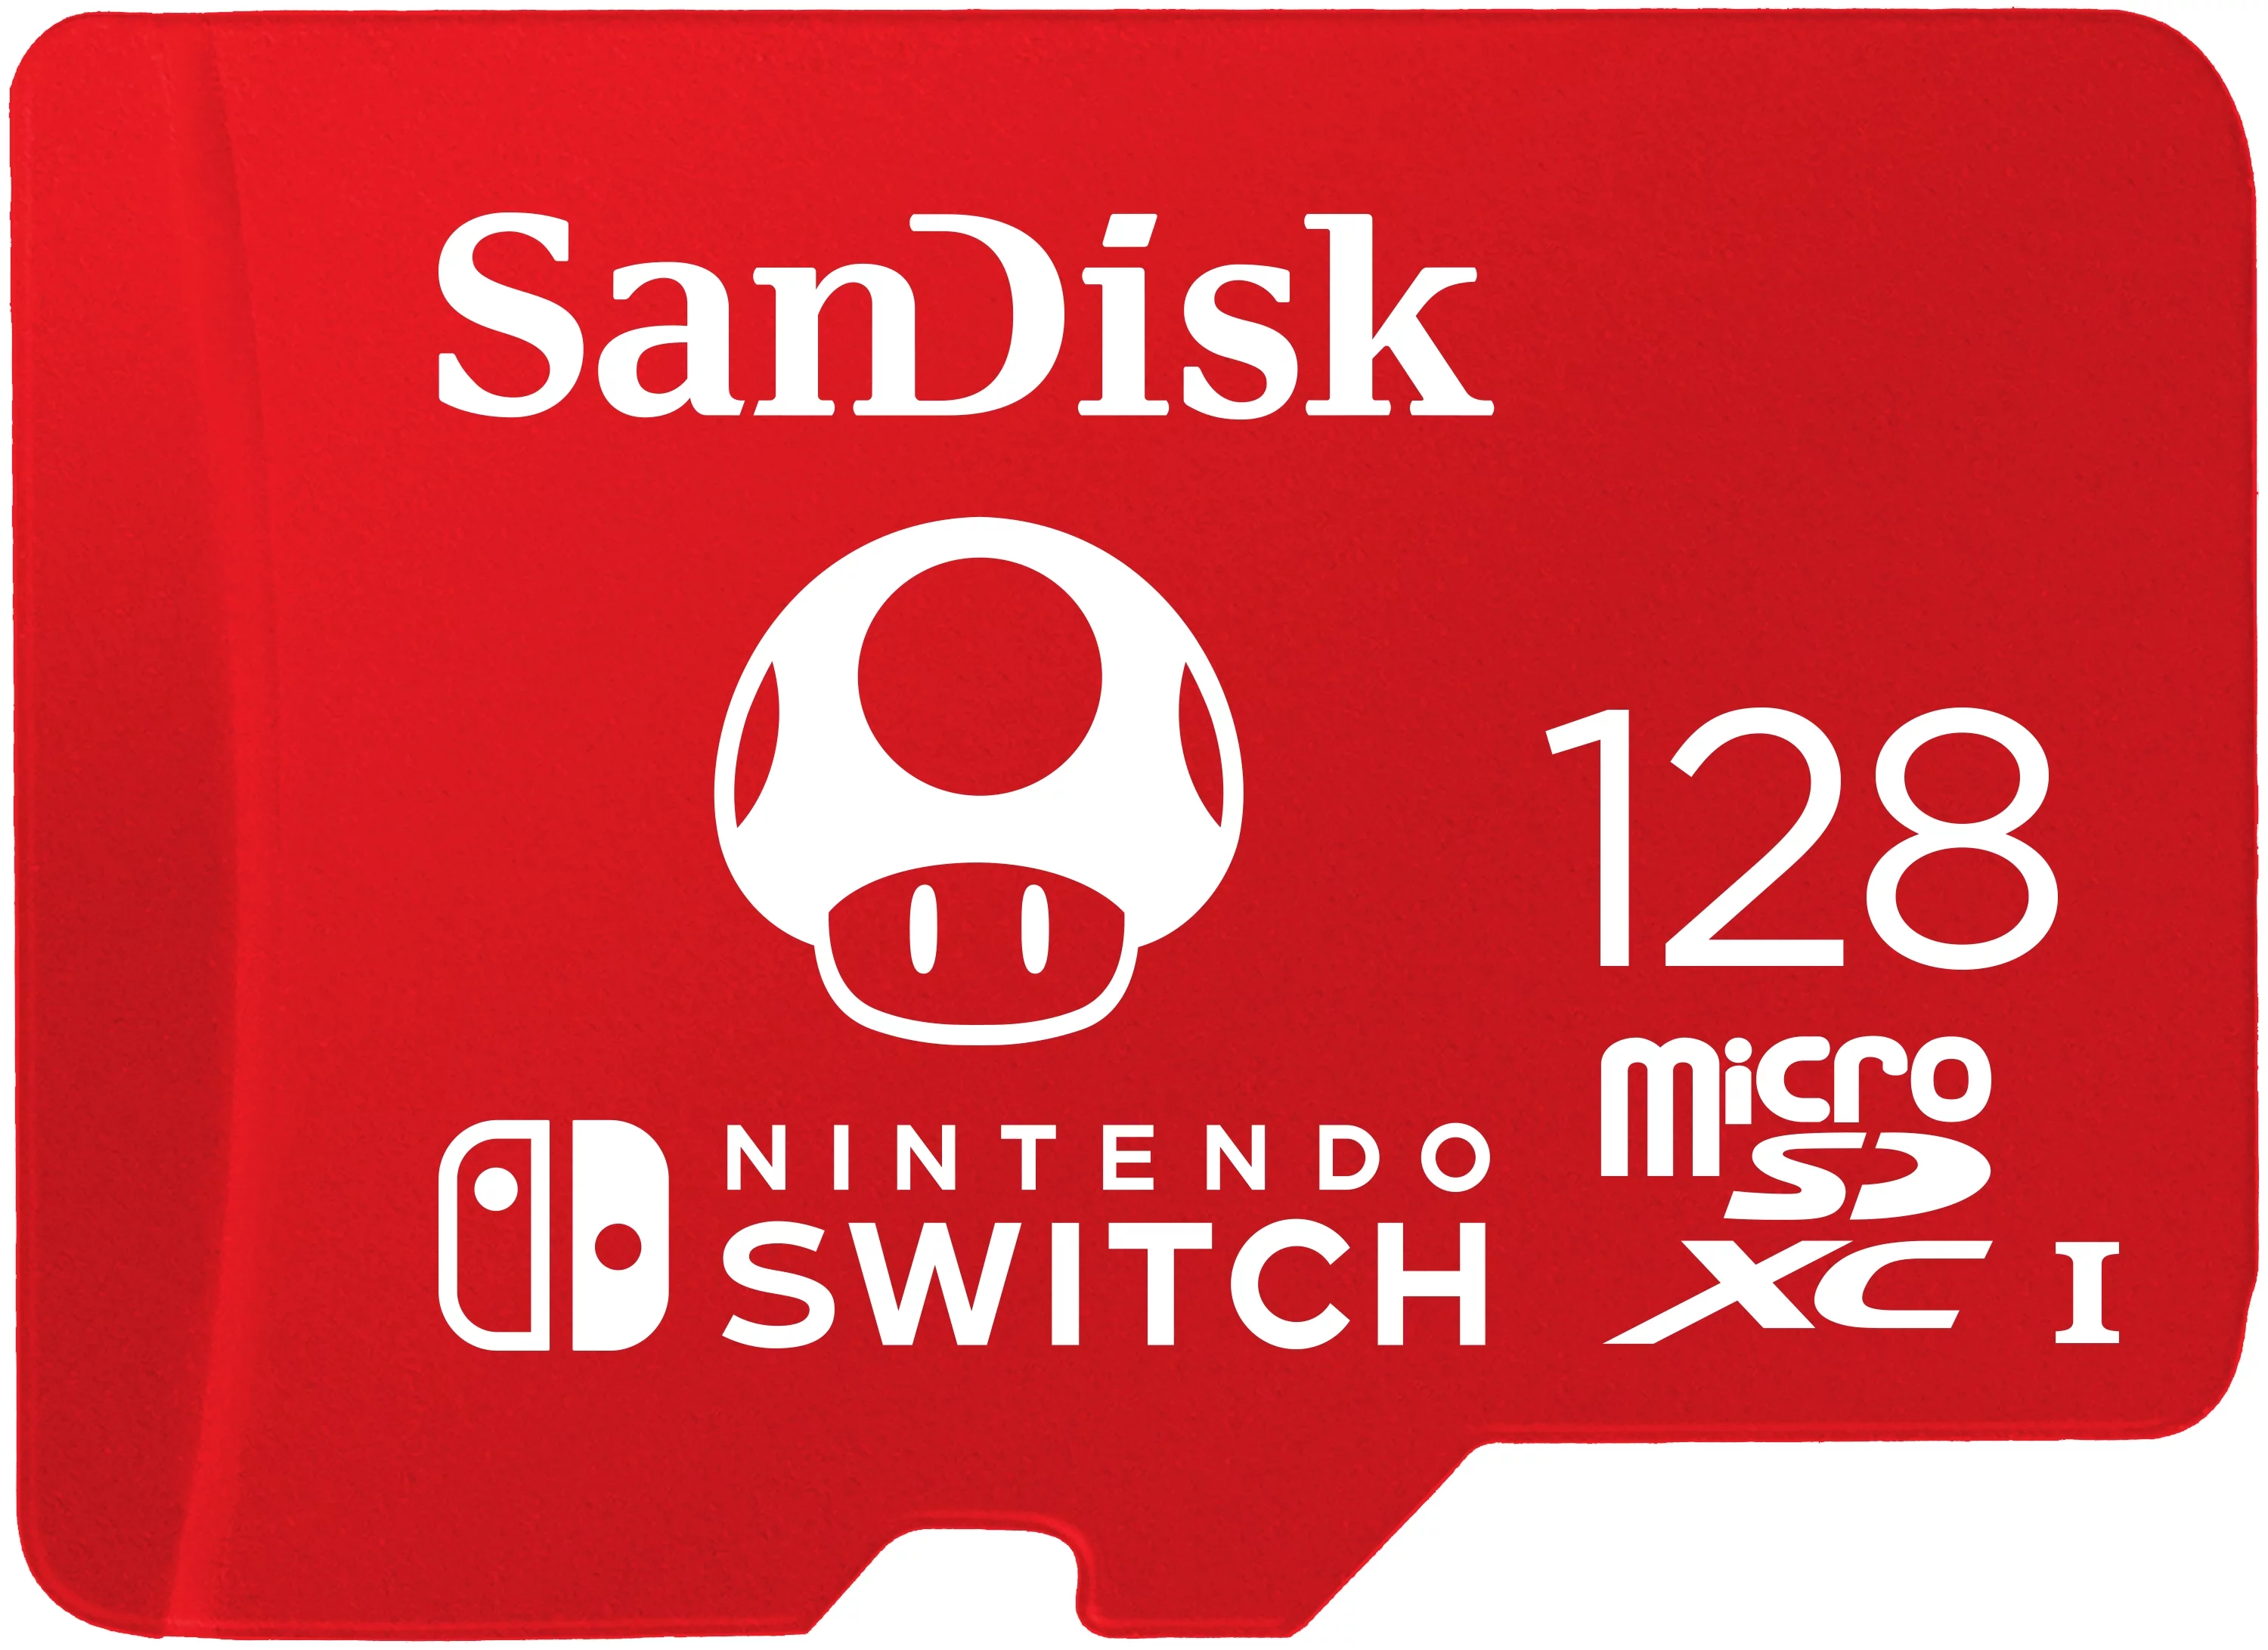 SanDisk 128GB microSDXC UHS-I Memory Card Licensed for Nintendo Switch, Red - 100MB/s, Micro SD Card - SDSQXBO-128G-AWCZA